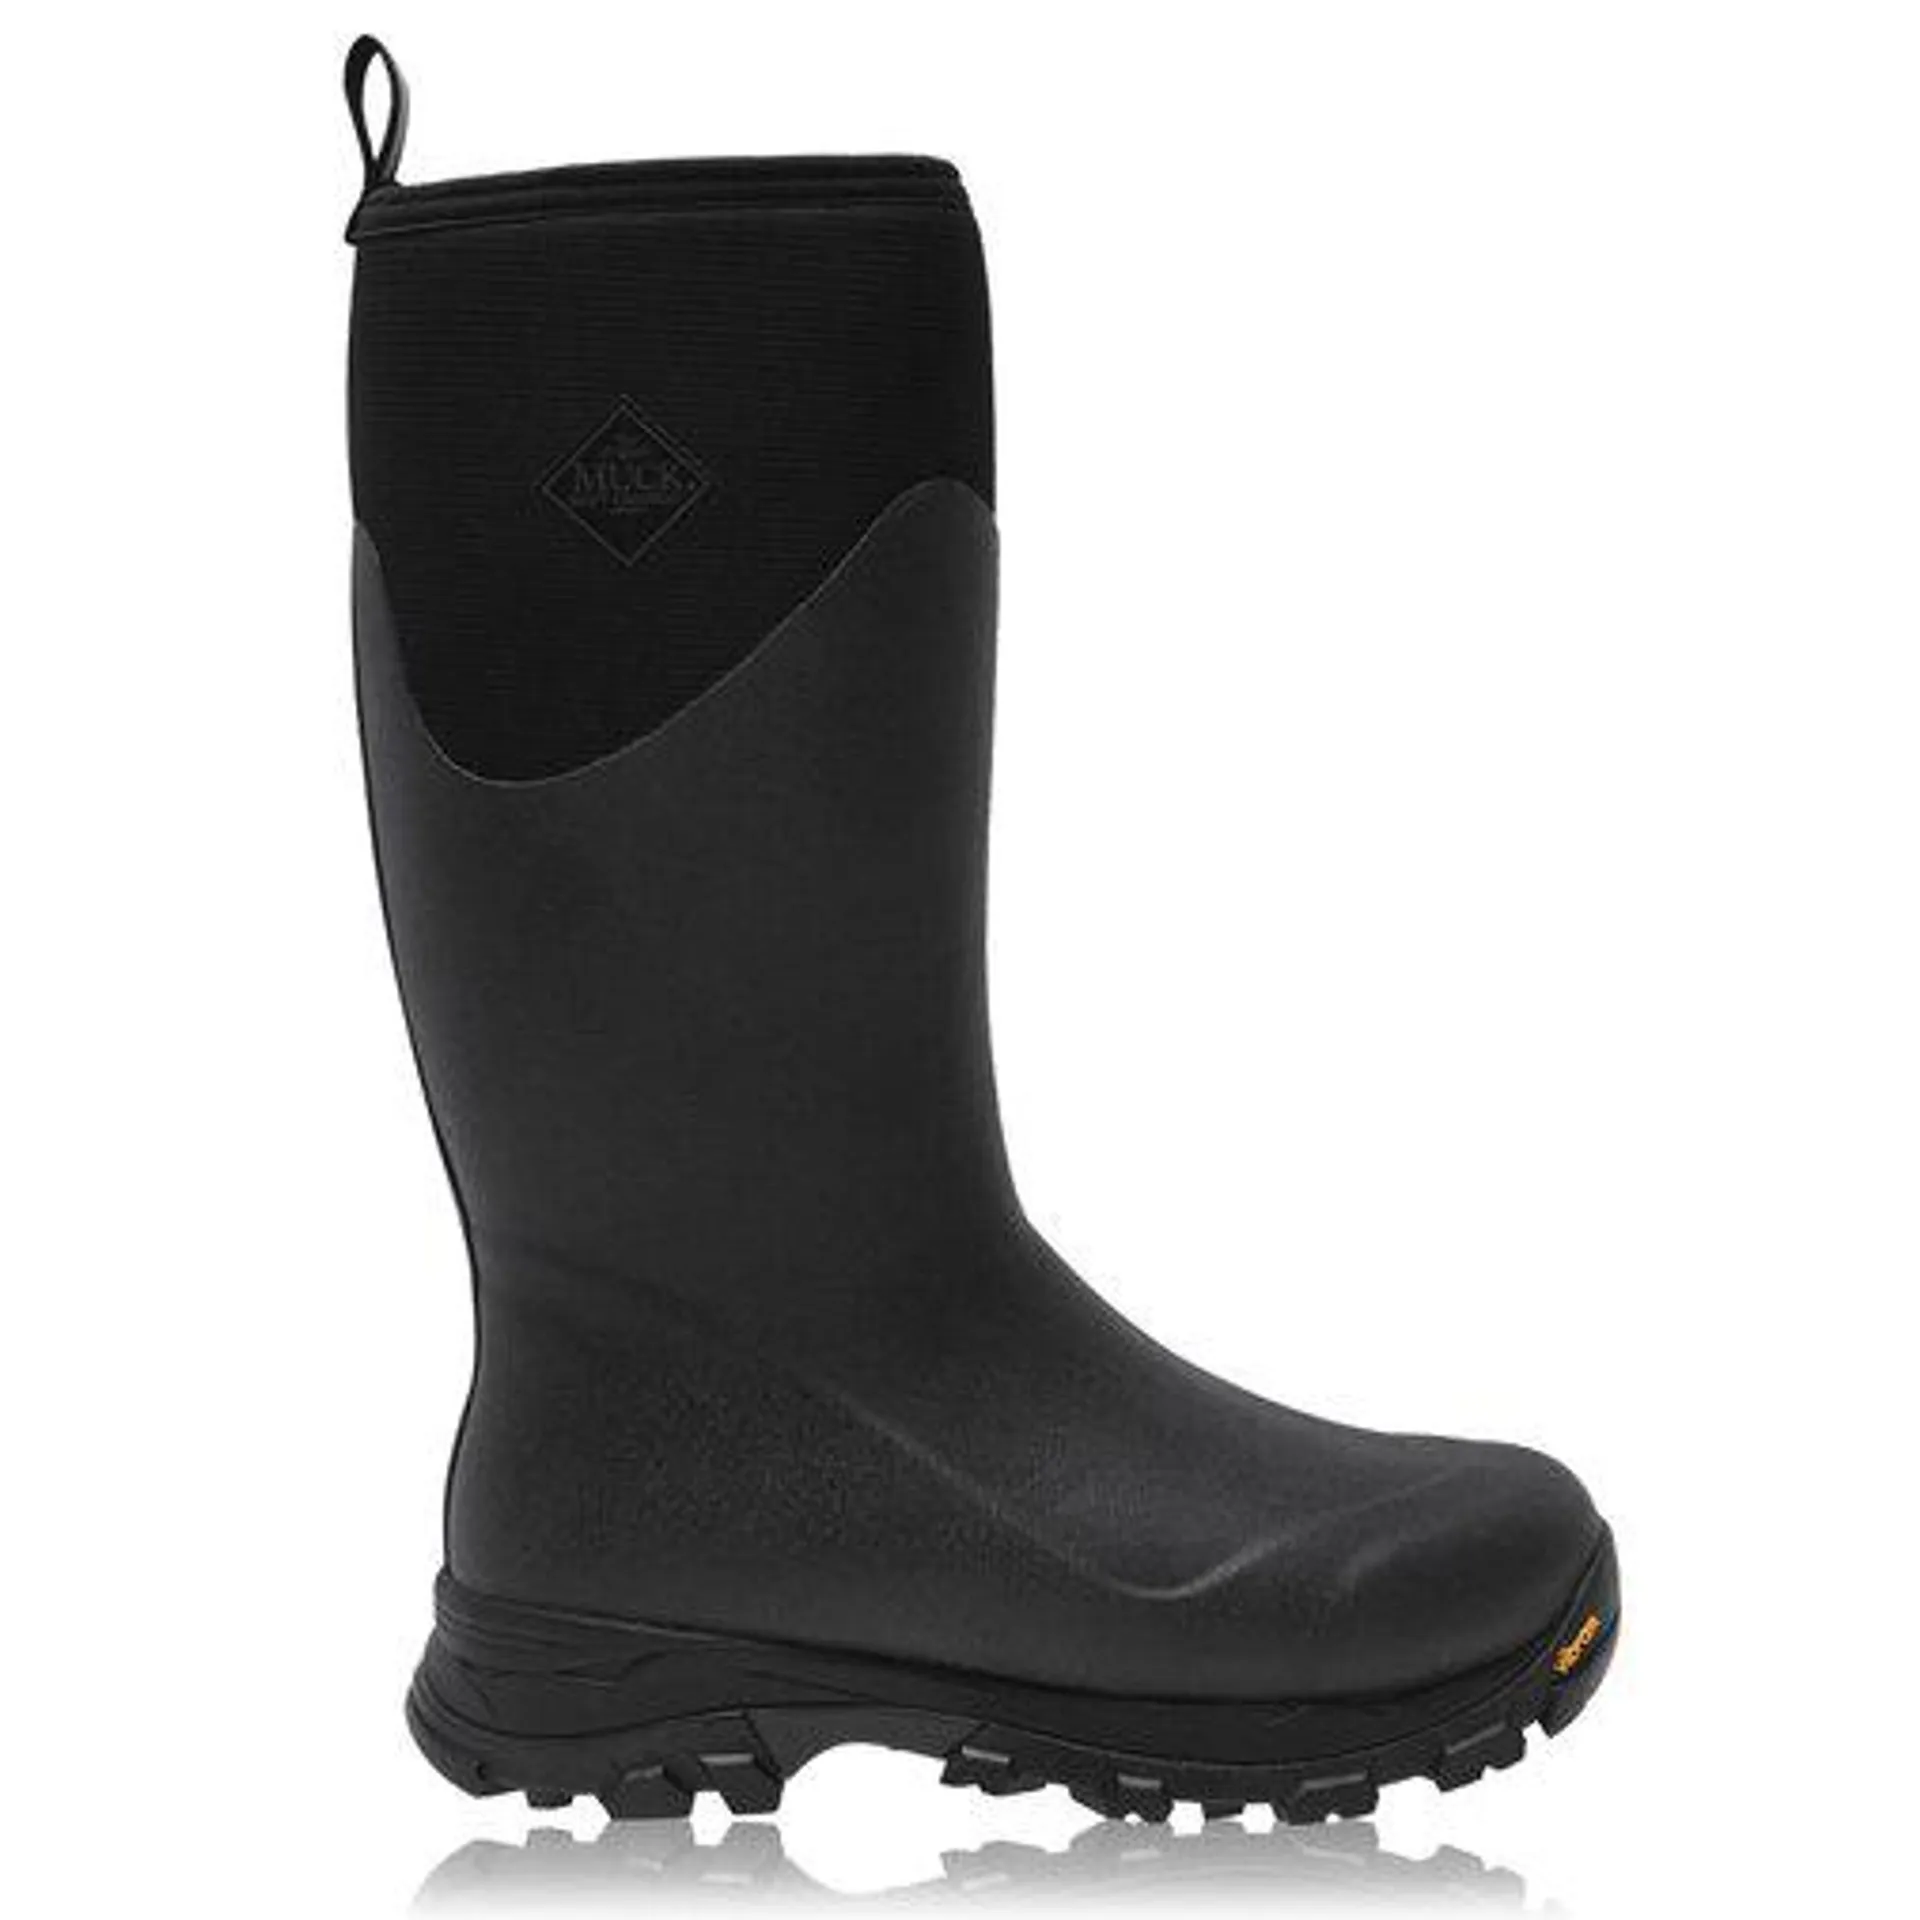 Muck Boot Arctic Ice Tall Wellington Boots Mens